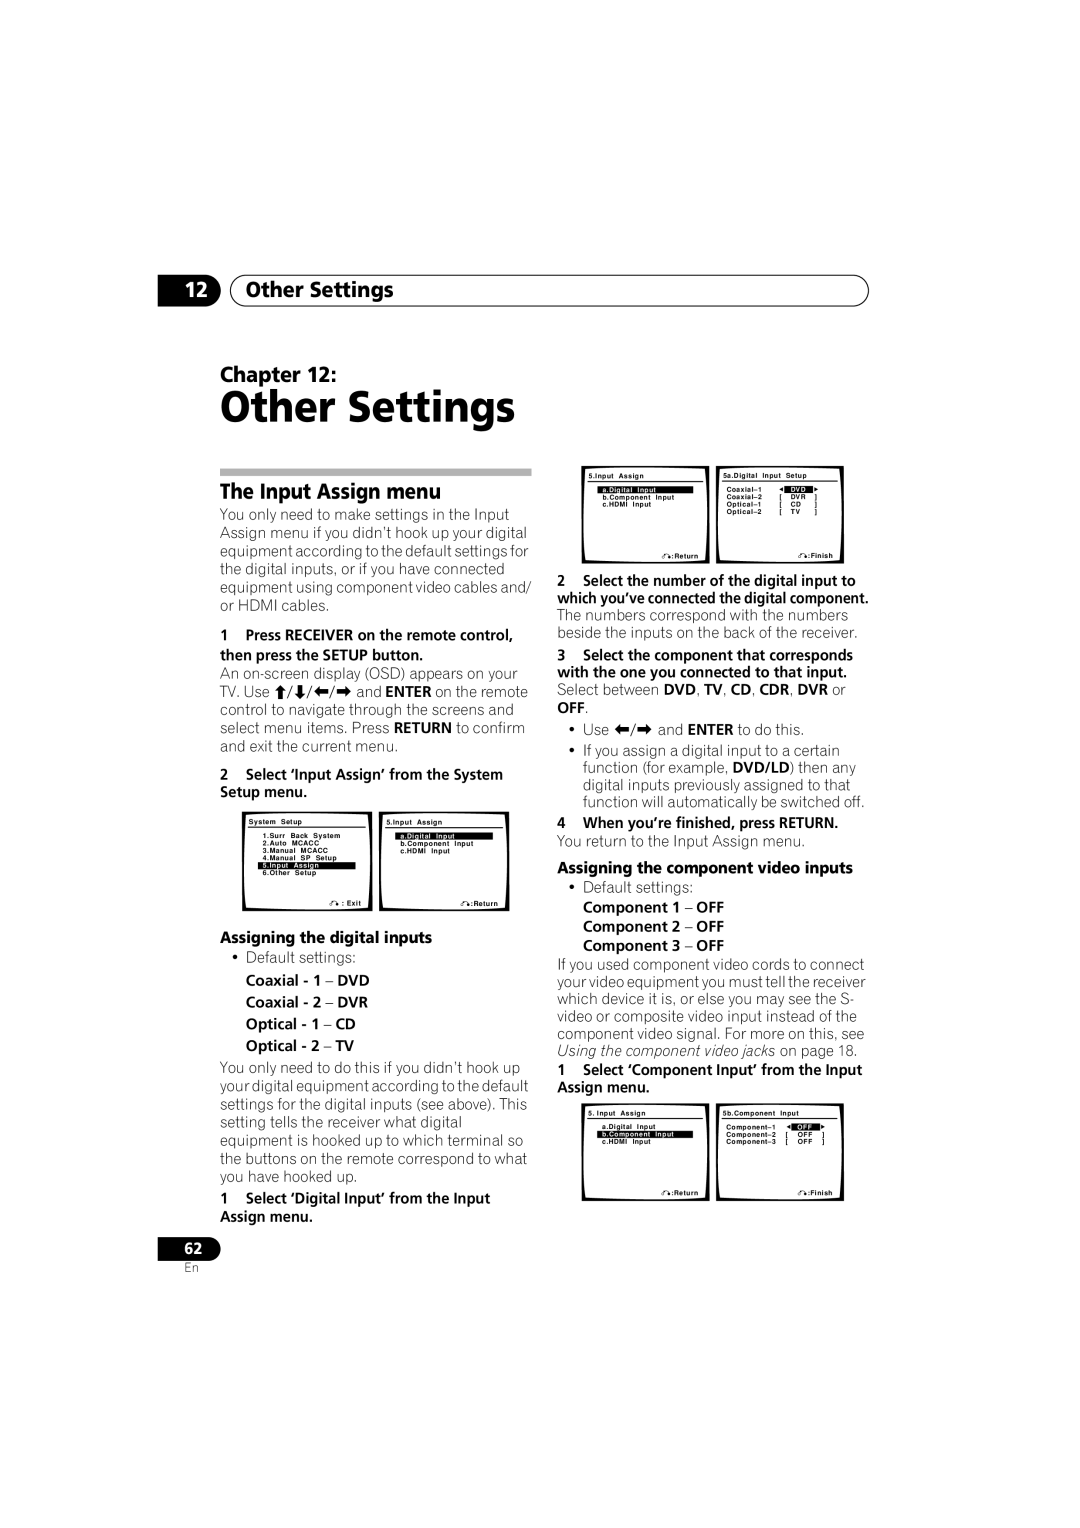 Pioneer VSX-917V-S/-K manual 12Other Settings Chapter, The Input Assign menu, Assigning the digital inputs 